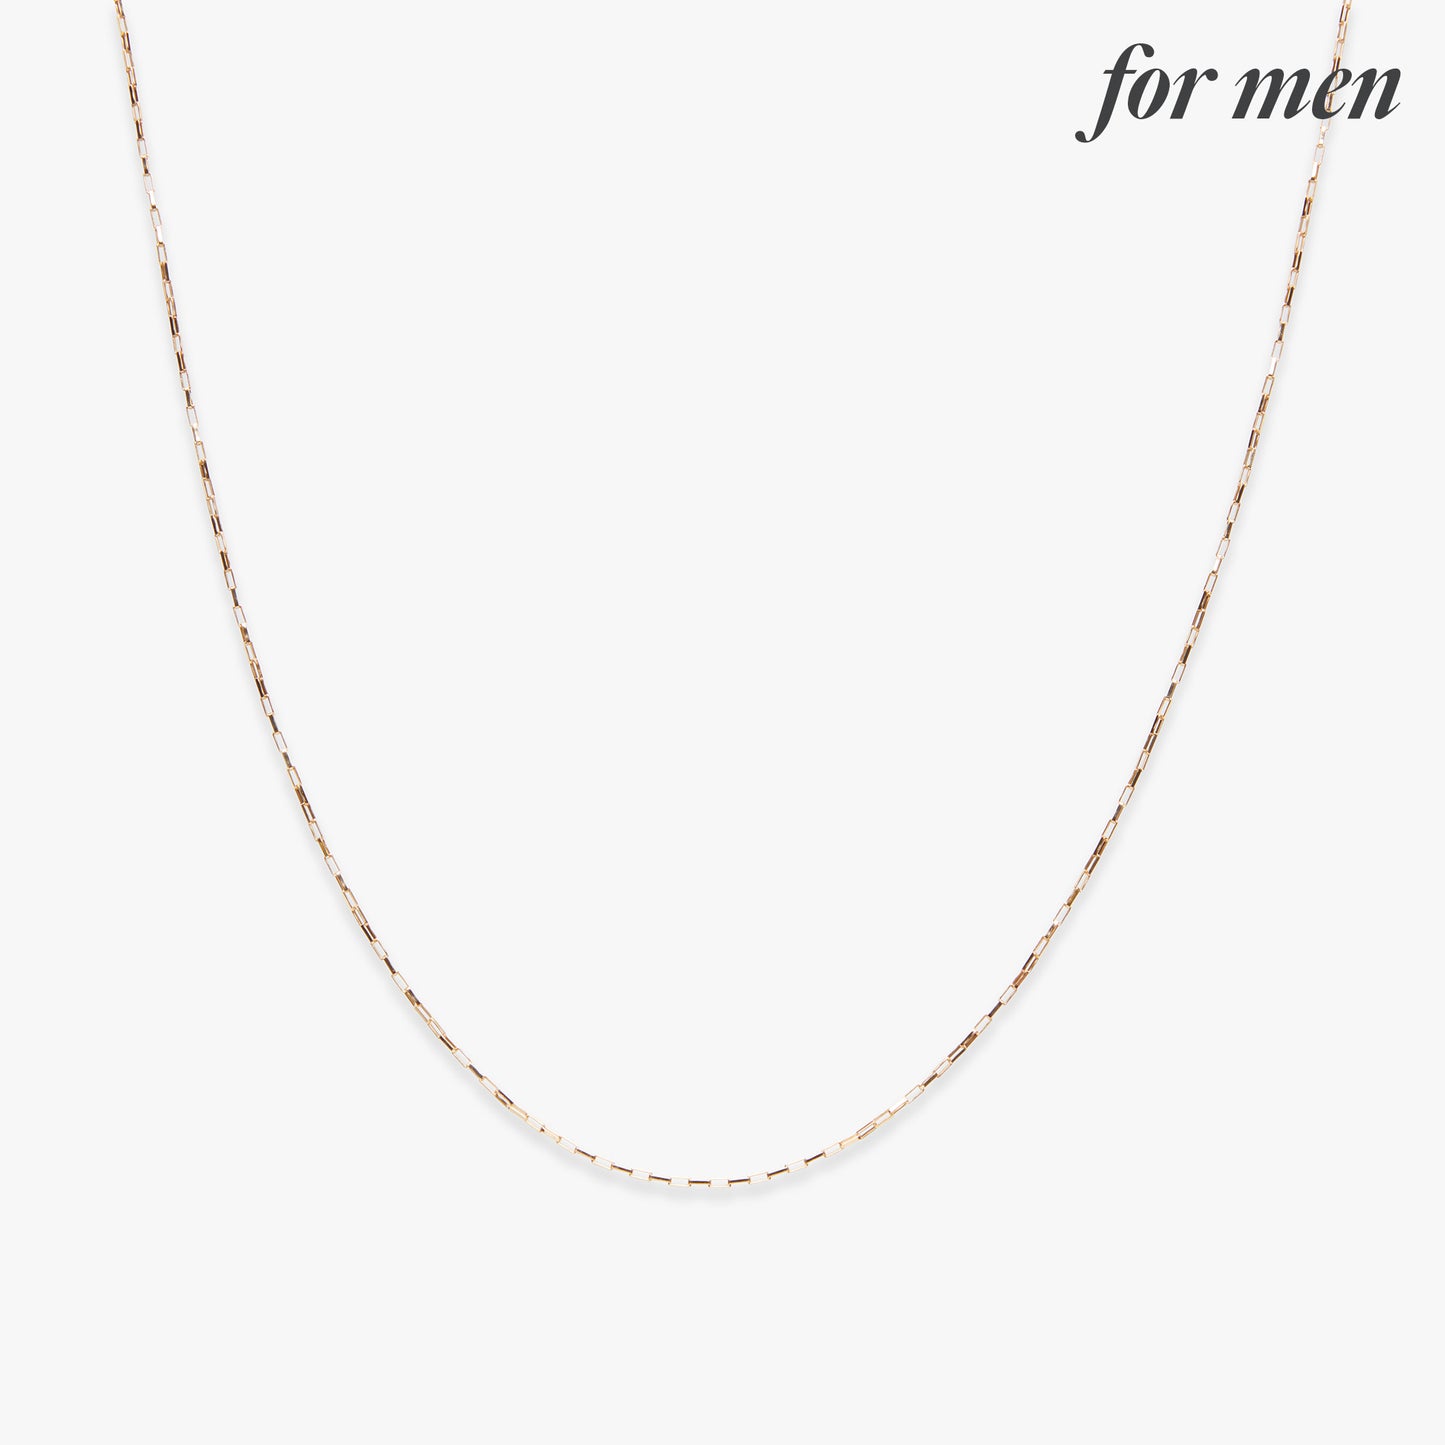 Box chain ketting gold filled voor mannen